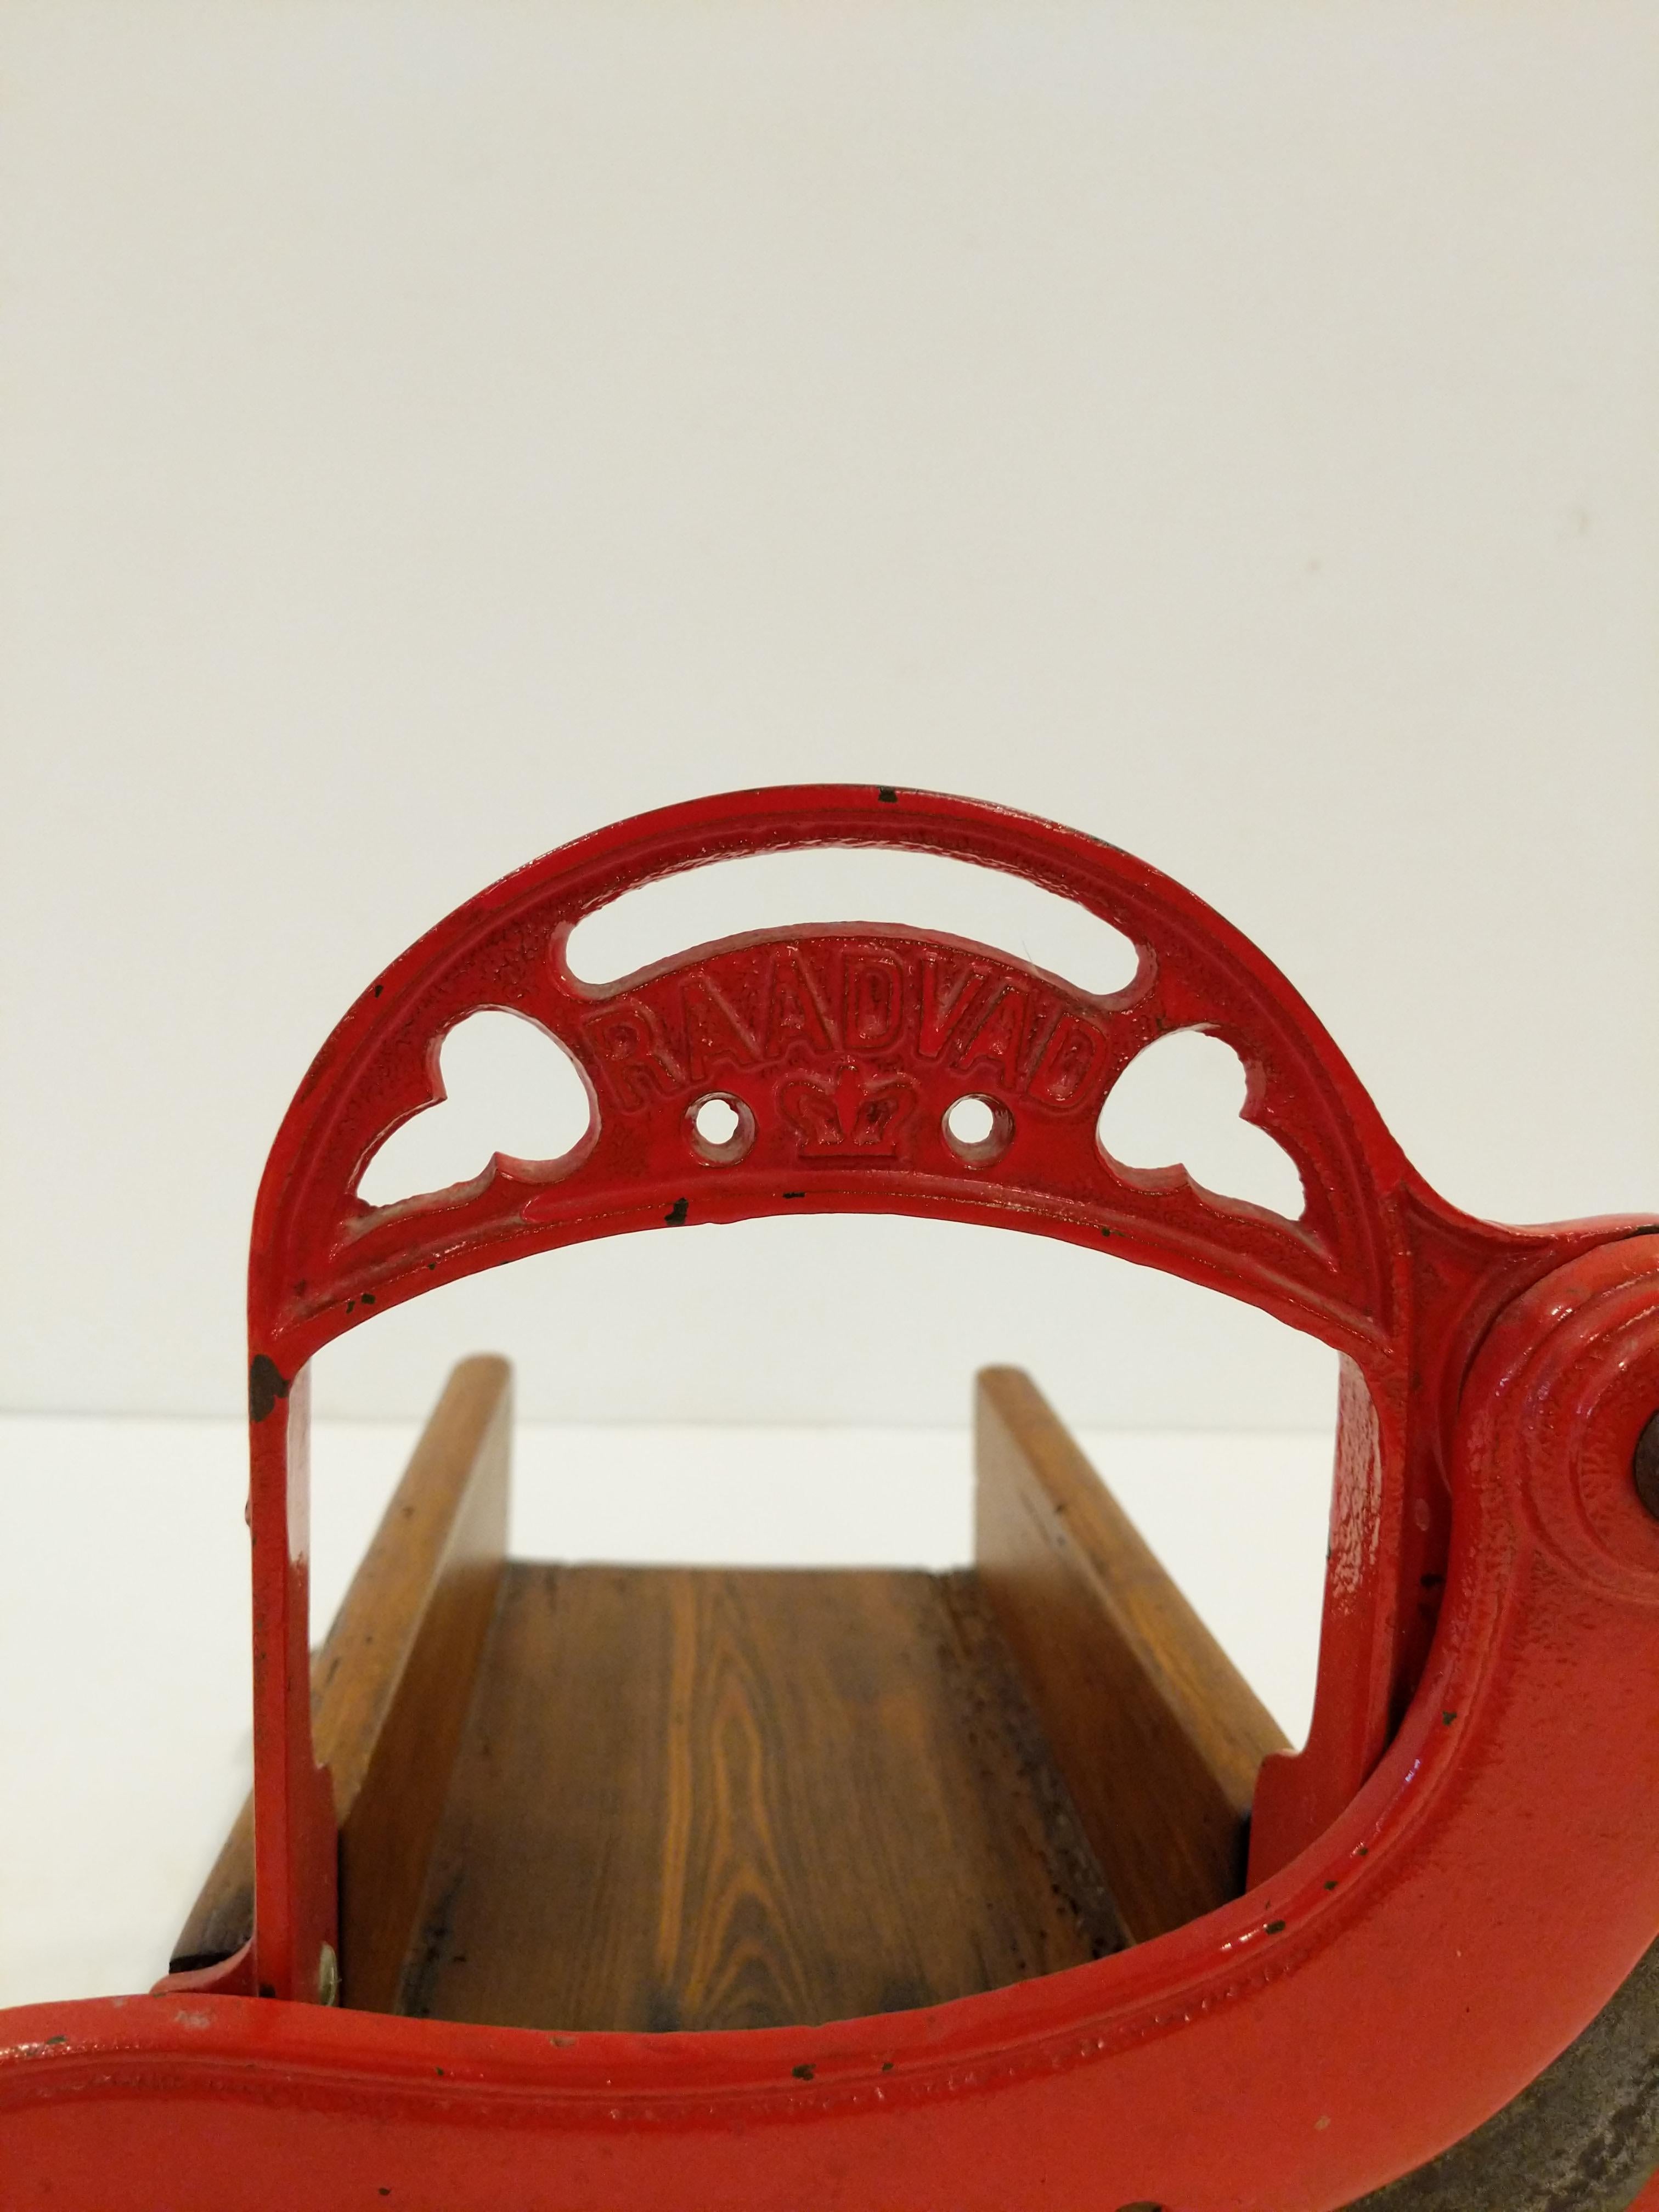 Authentic antique Danish bread slicer / guillotine in red.

Model 4 by Raadvad.

This slicer is in good condition overall and expectedly shows its age a bit.

Ref: RV27-003